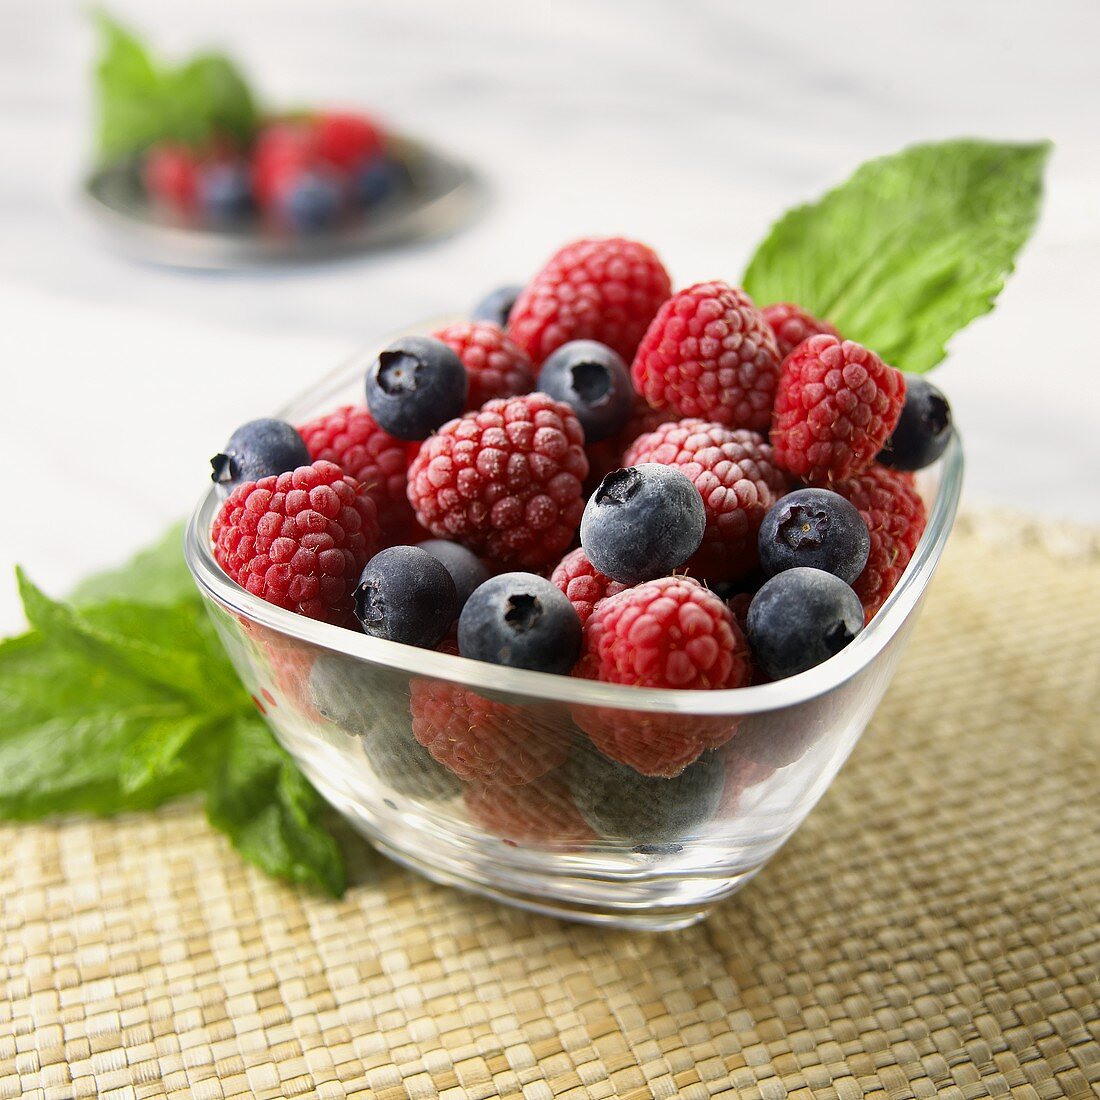 Raspberries and blueberries in glass bowl with mint